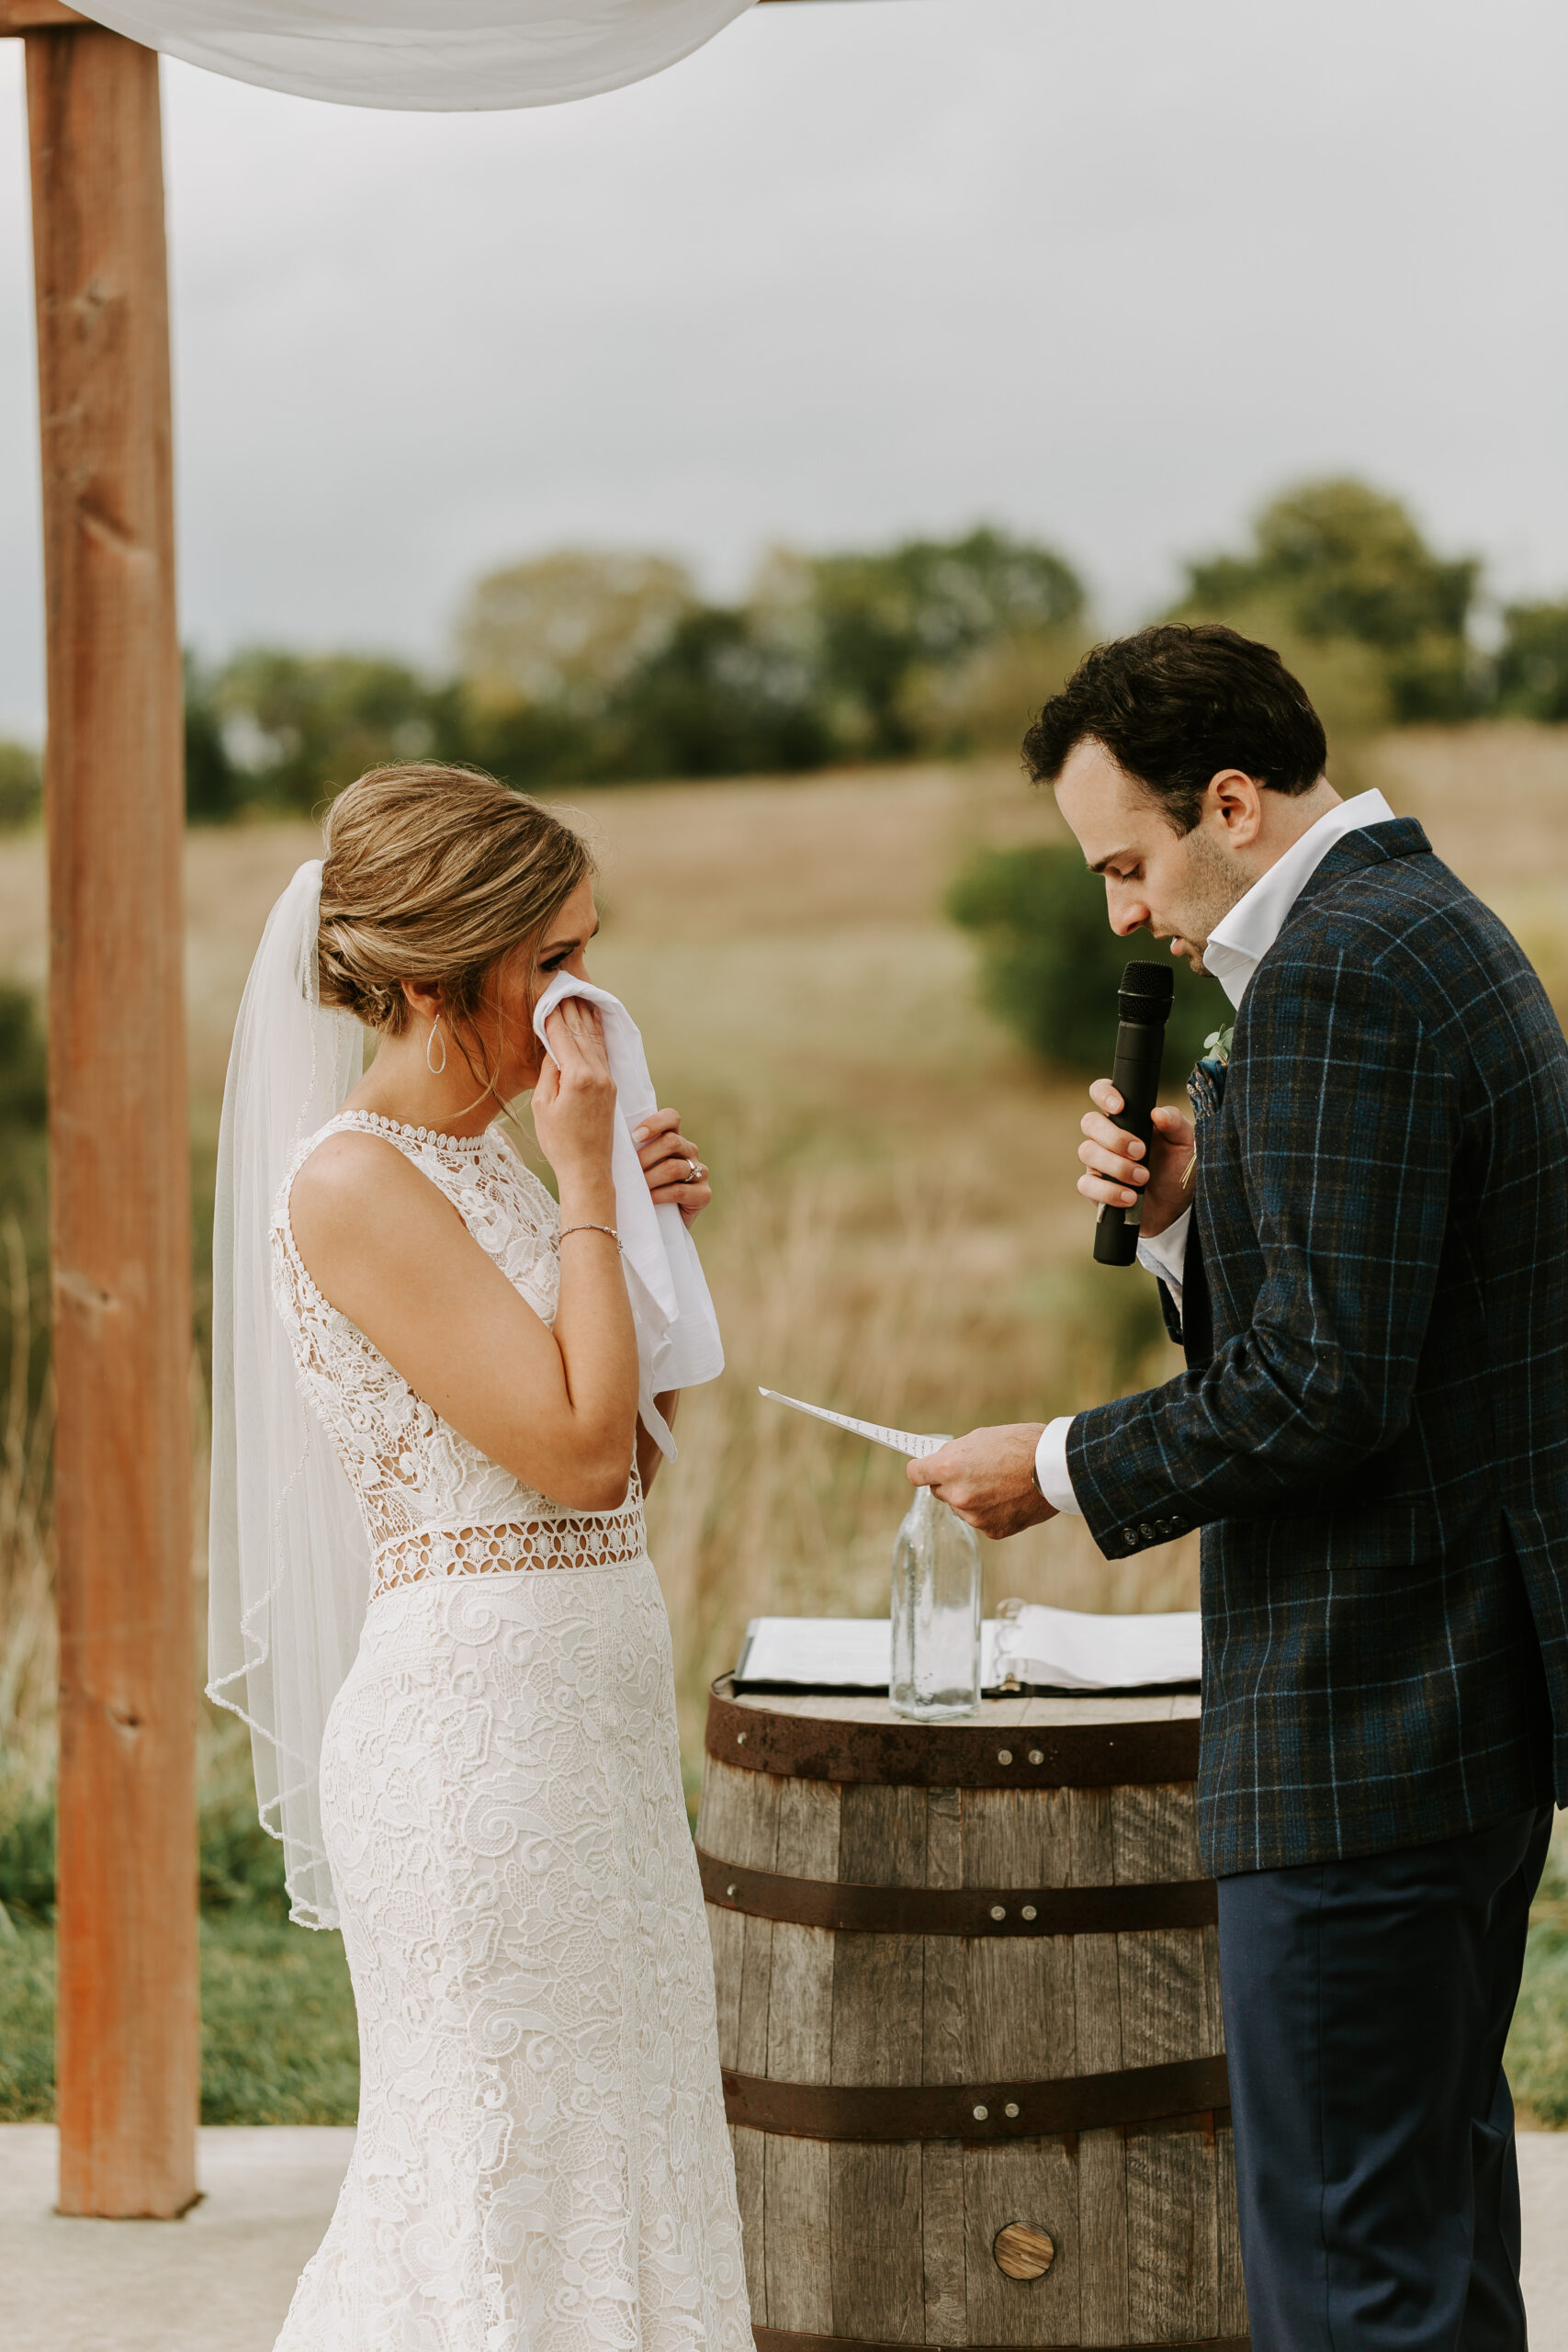 Katherine and Spencers Carper Winery wedding day in Iowa